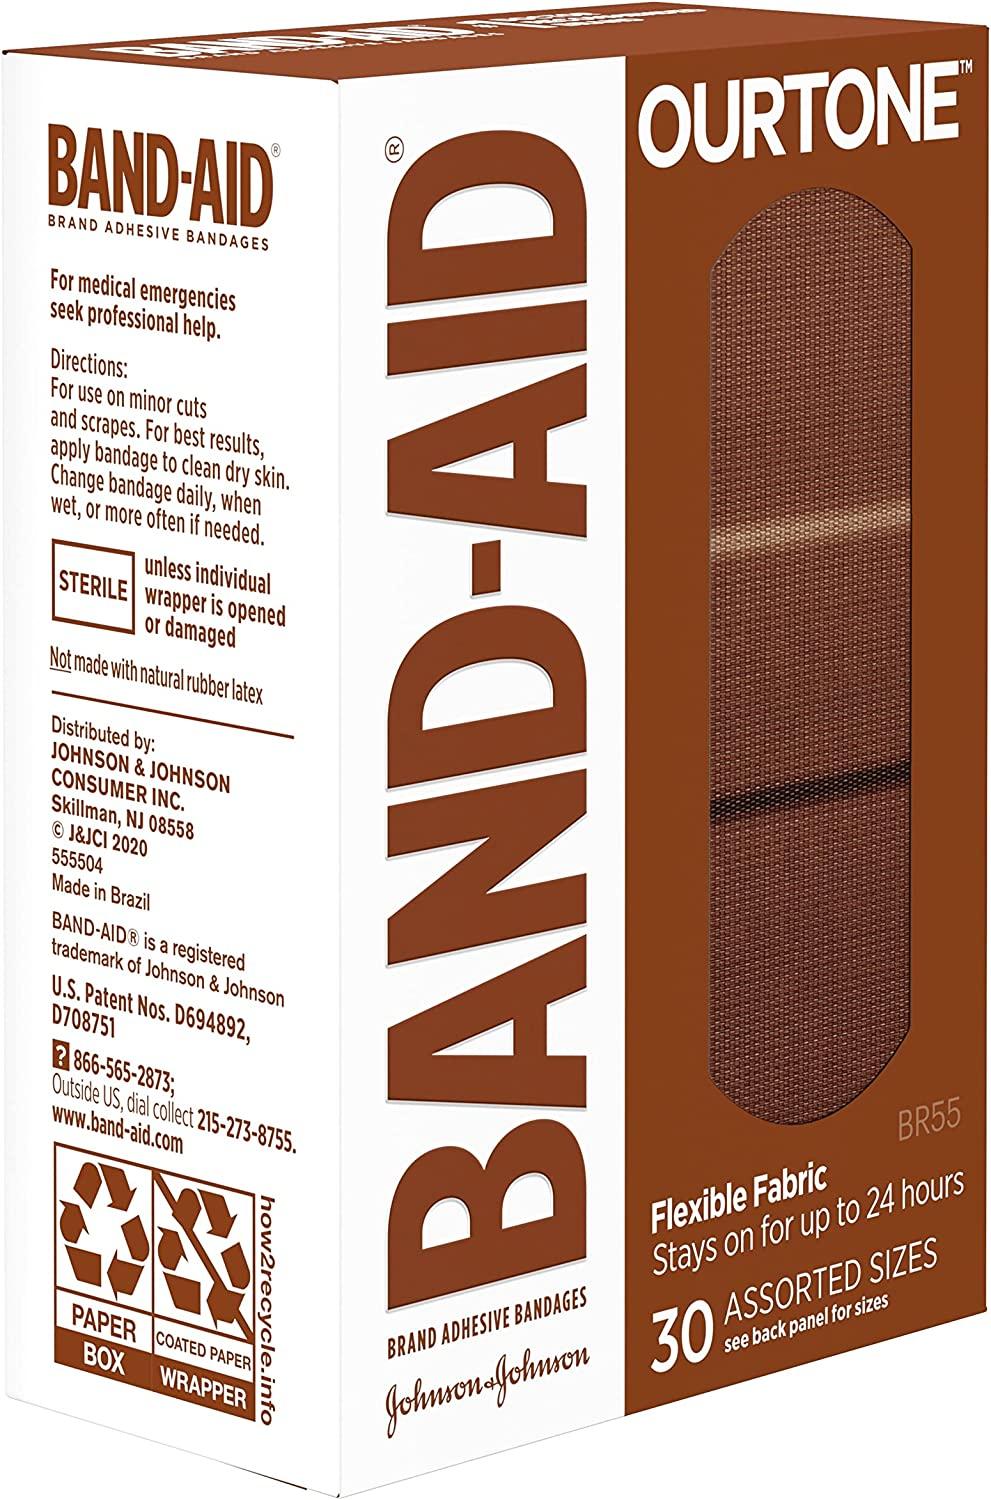 Band-Aid Brand Flexible Fabric Adhesive Bandages, Flexible Protection &  Care of Minor Cuts & Scrapes, Quilt-Aid Pad for Painful Wounds, Dark Brown